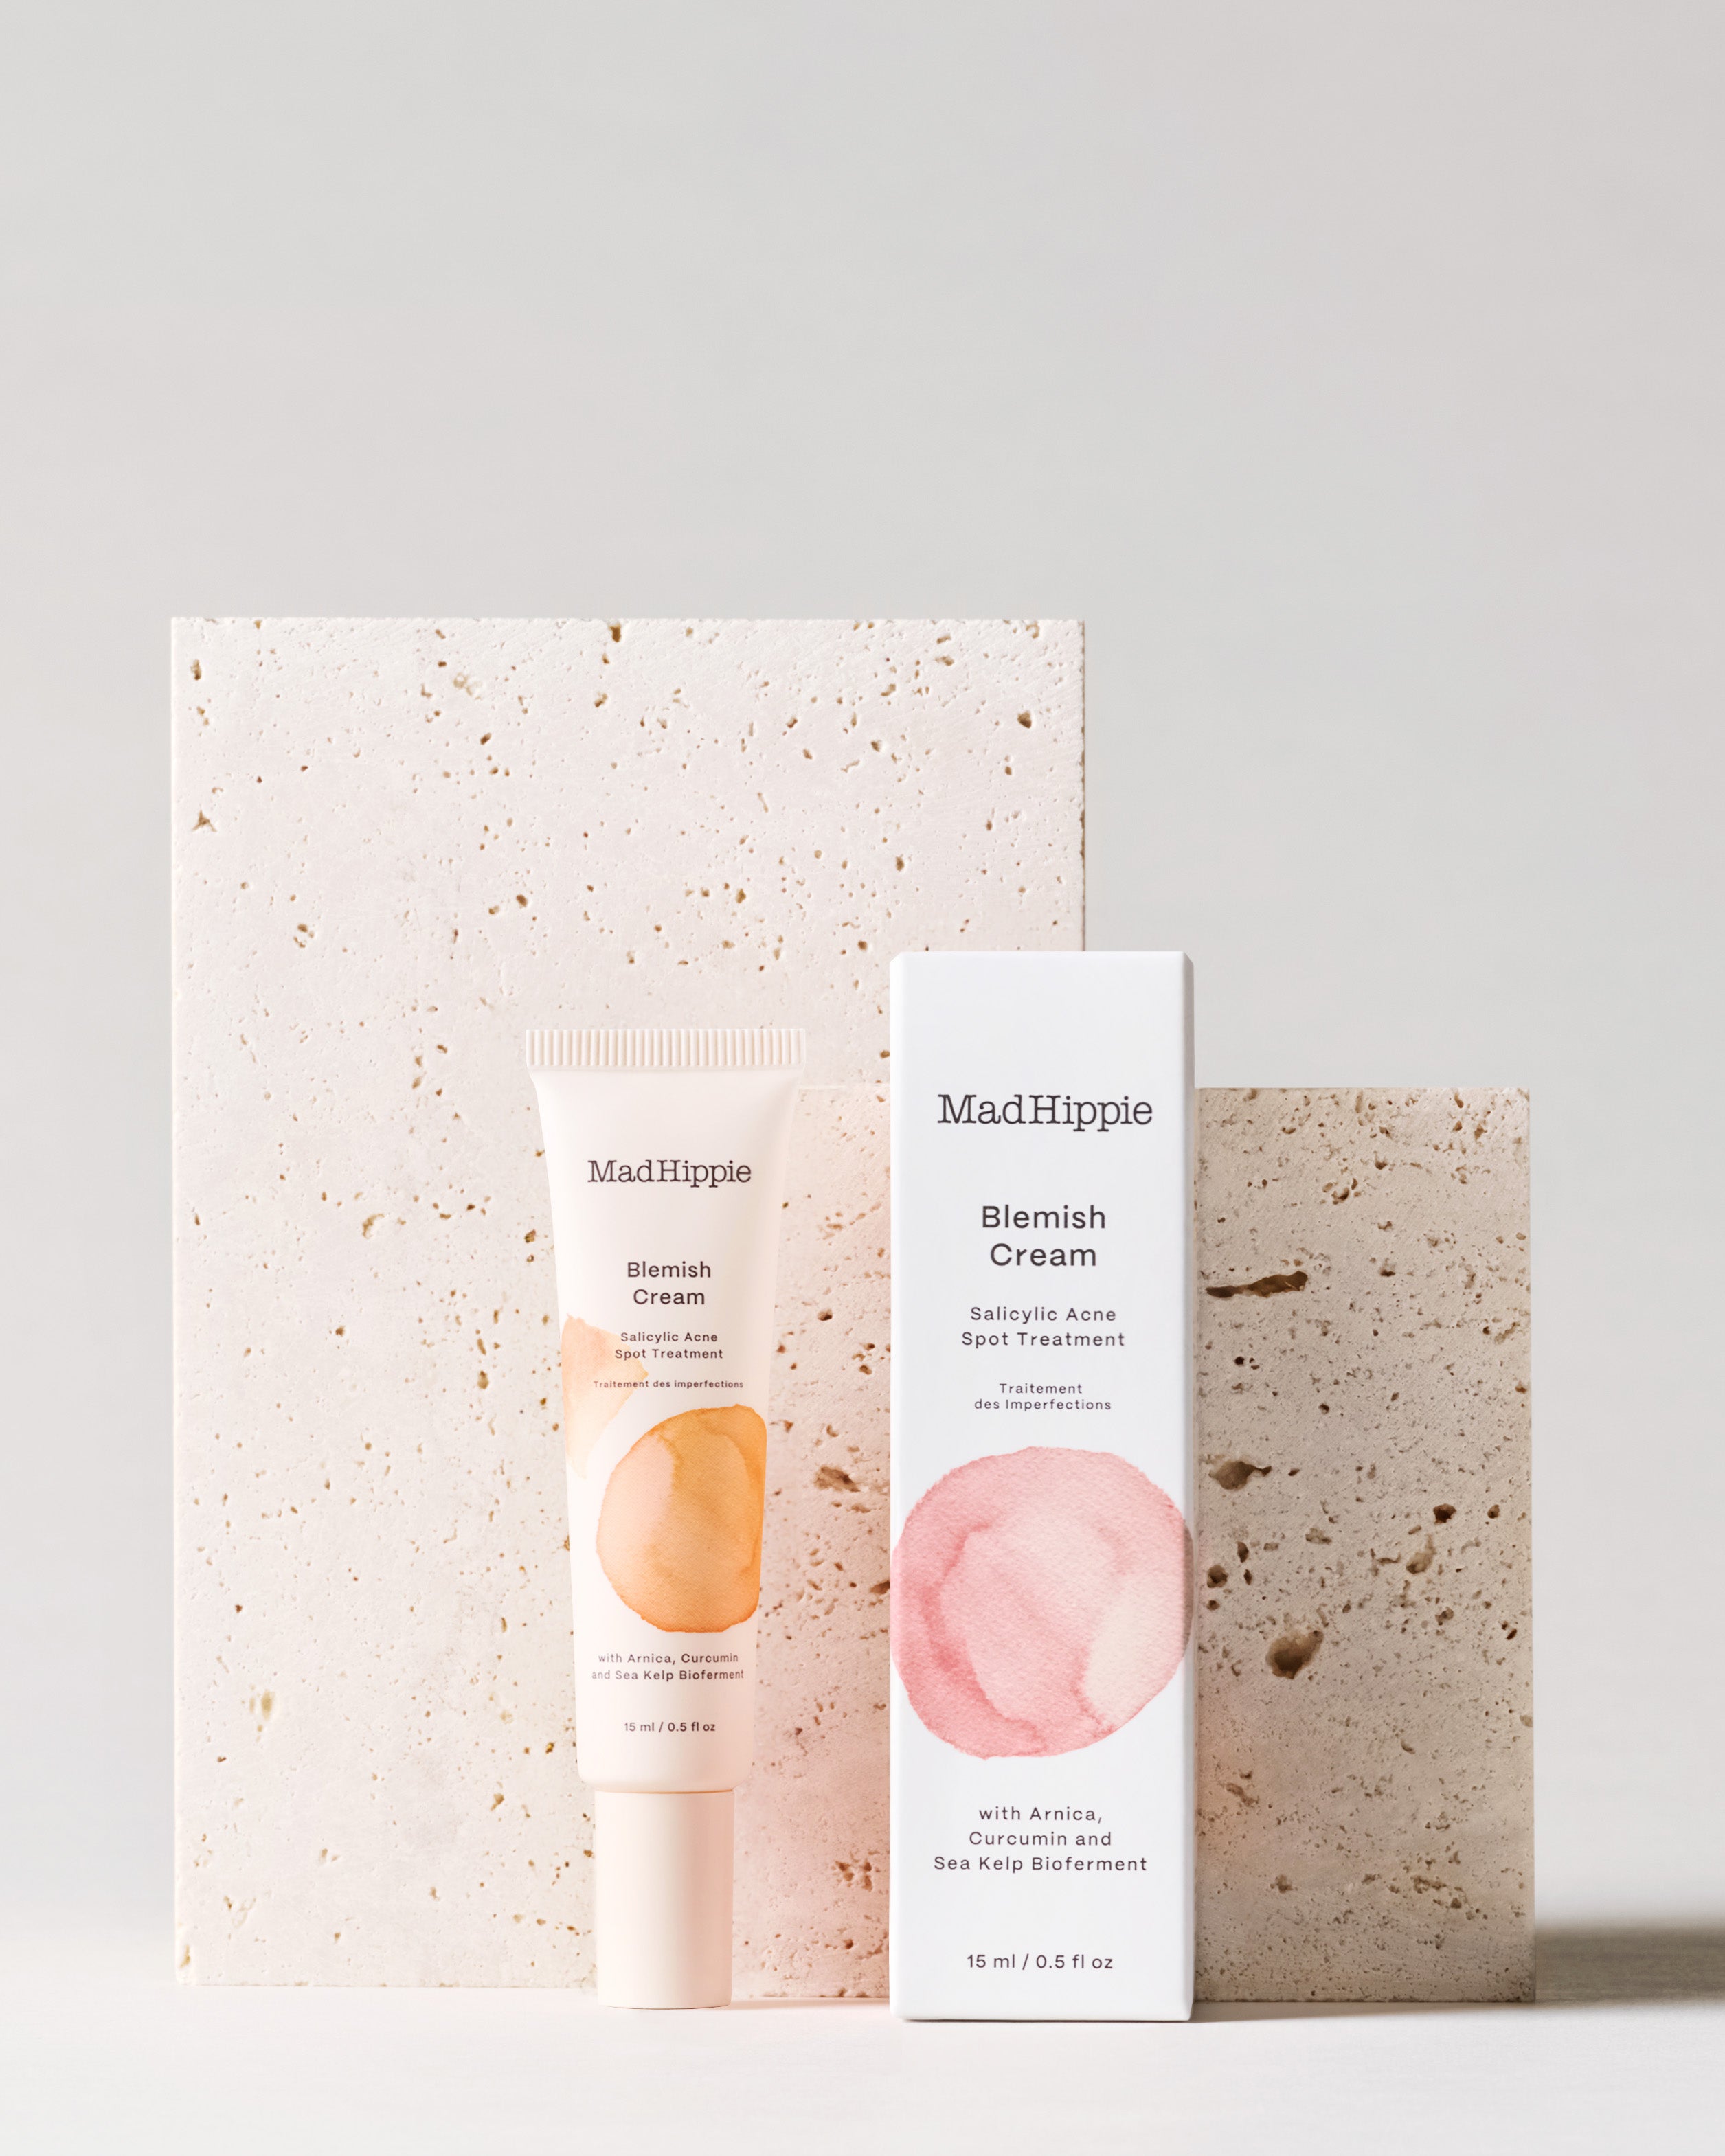 Blemish Cream tube + box in front of stone slabs, with gray background